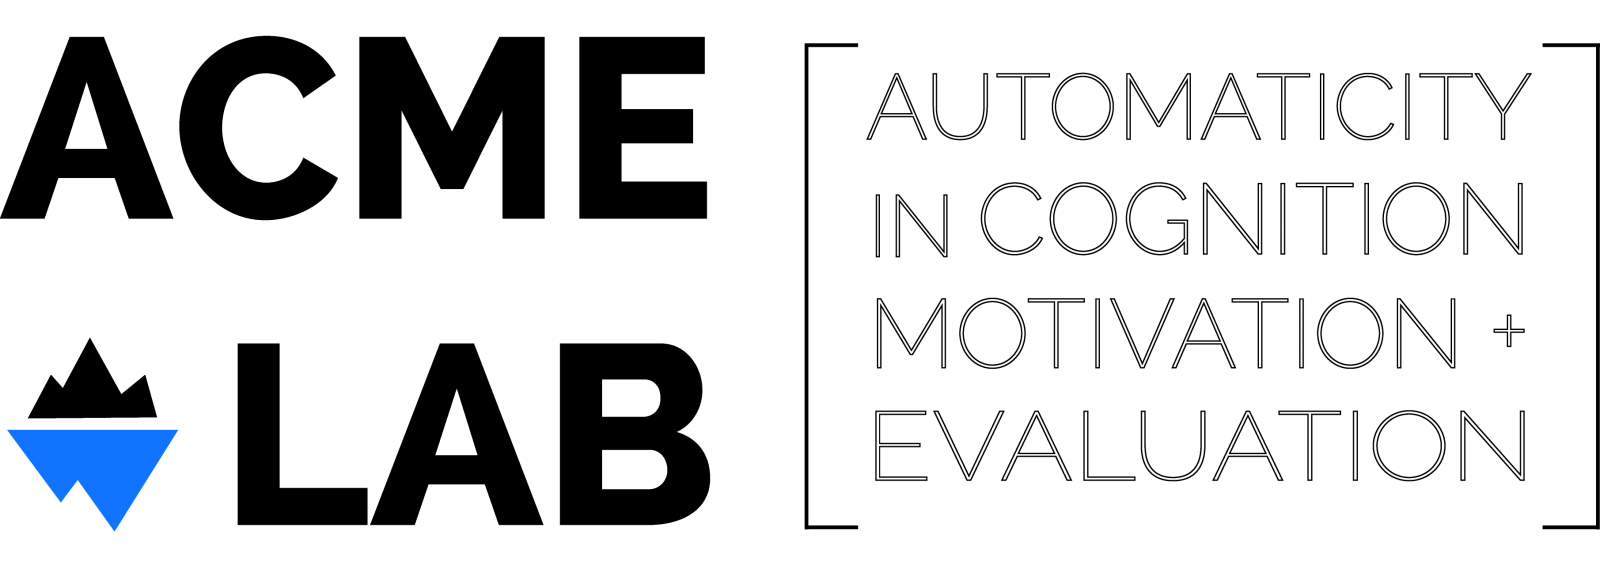  Automaticity in Cognition, Motivation, and Evaluation